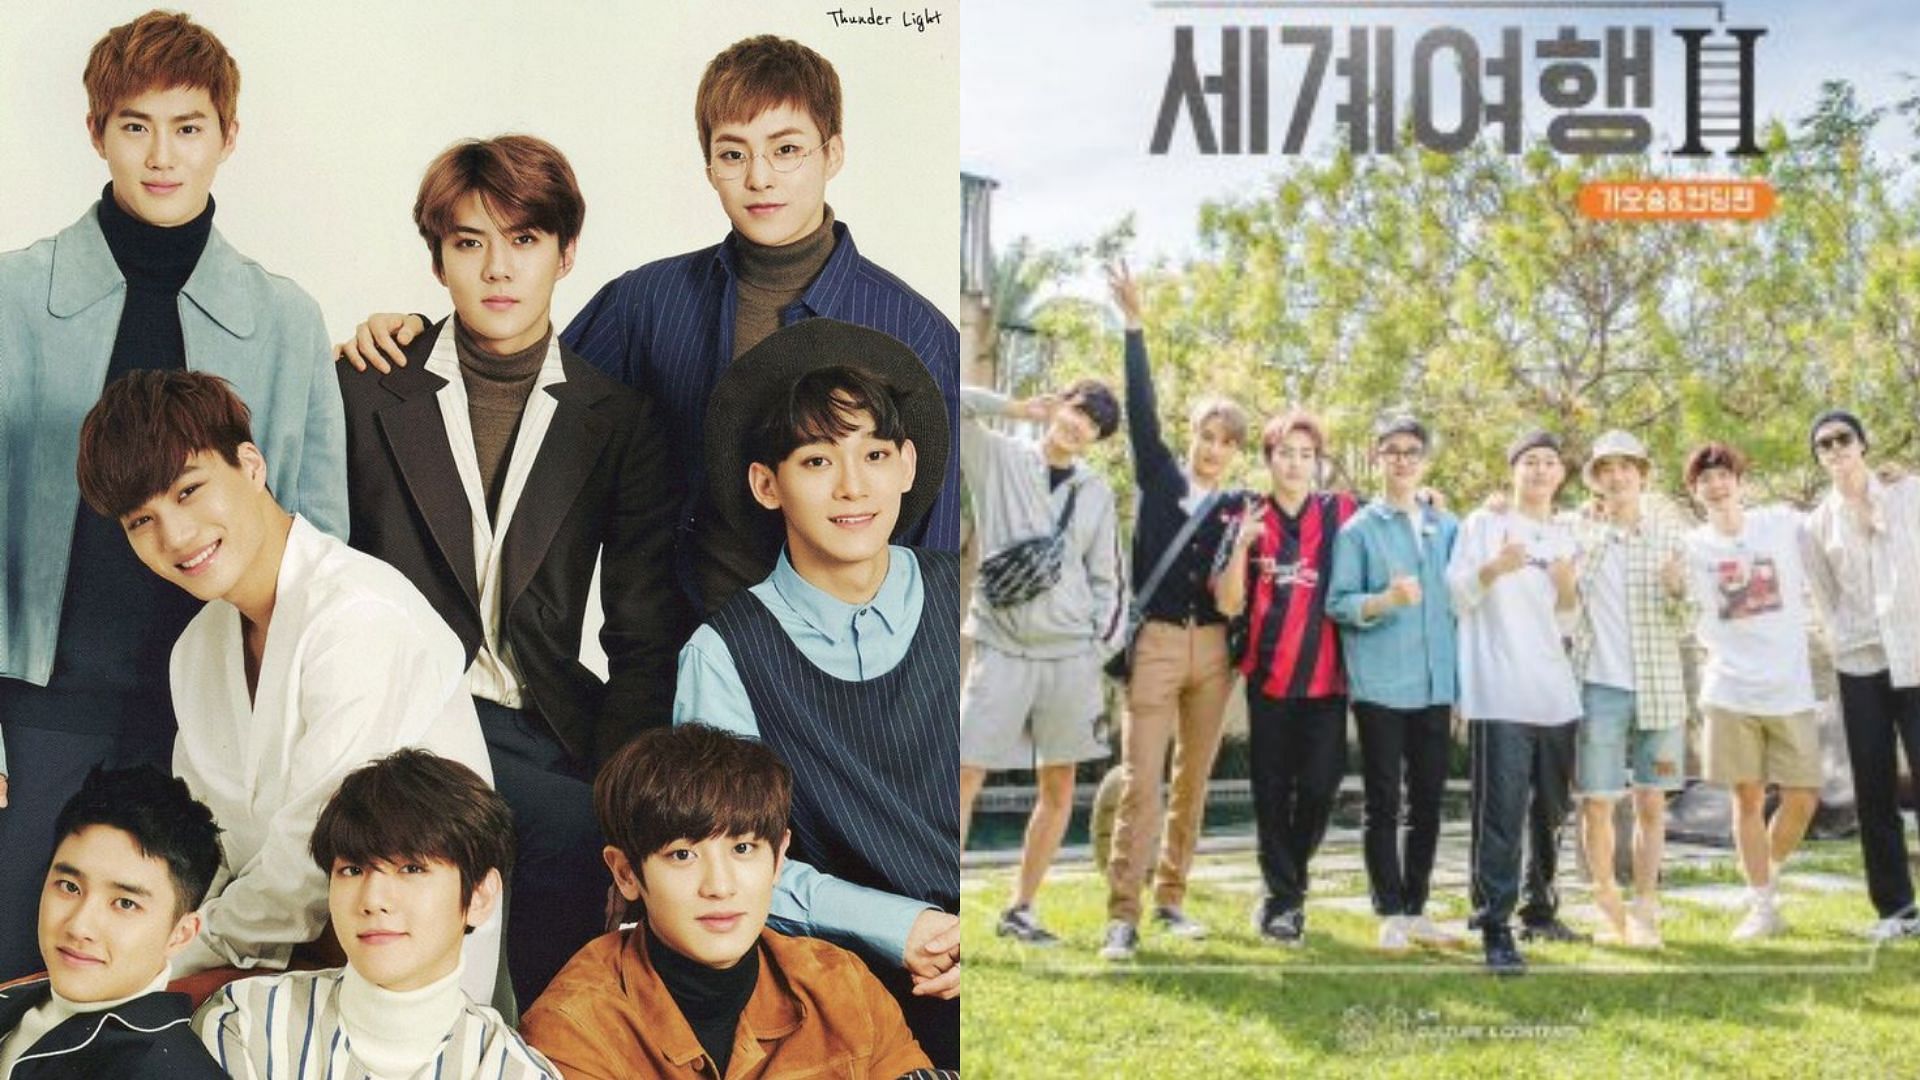 EXO's reality show is back with Season 3